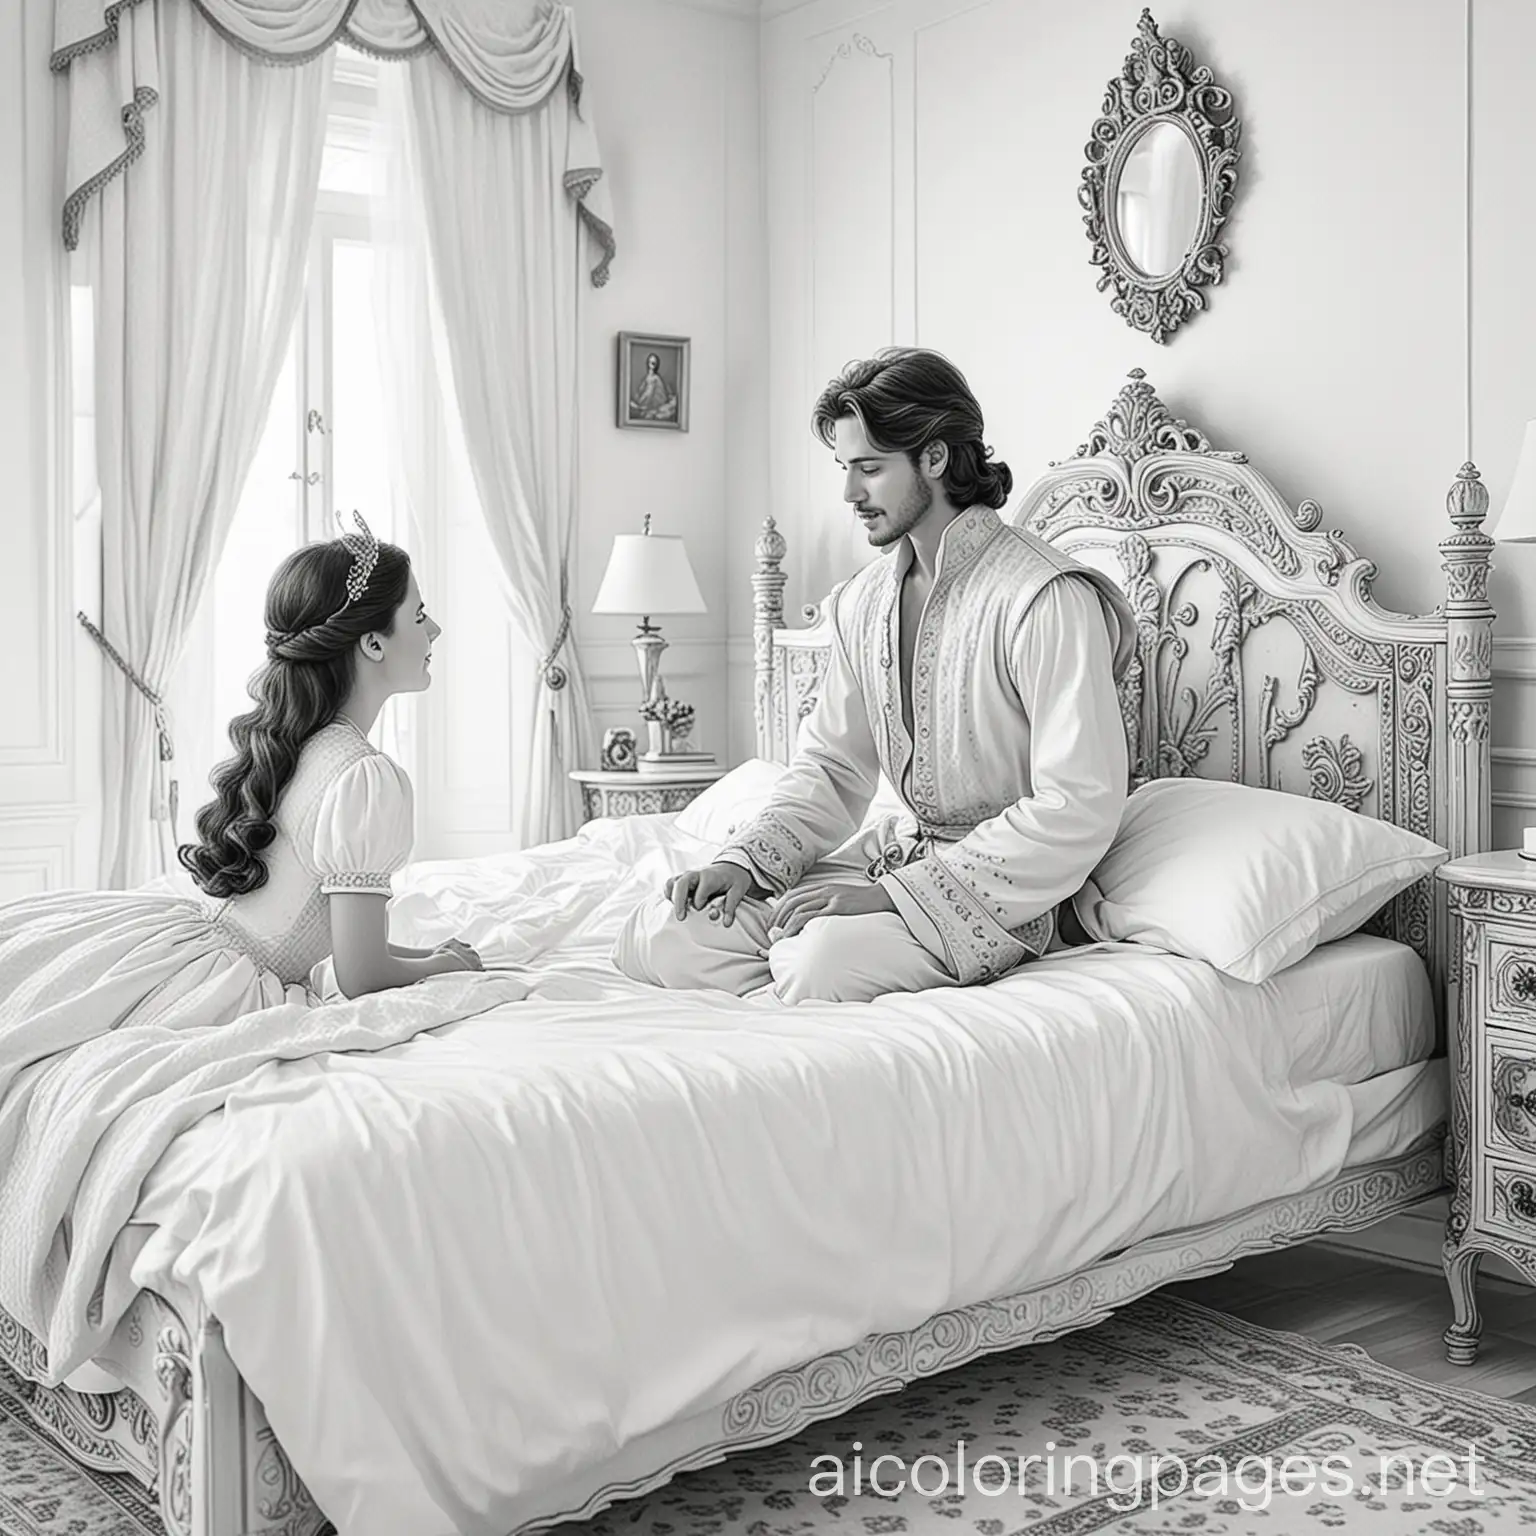 Young-Prince-Talking-to-Princess-in-Her-Bedroom